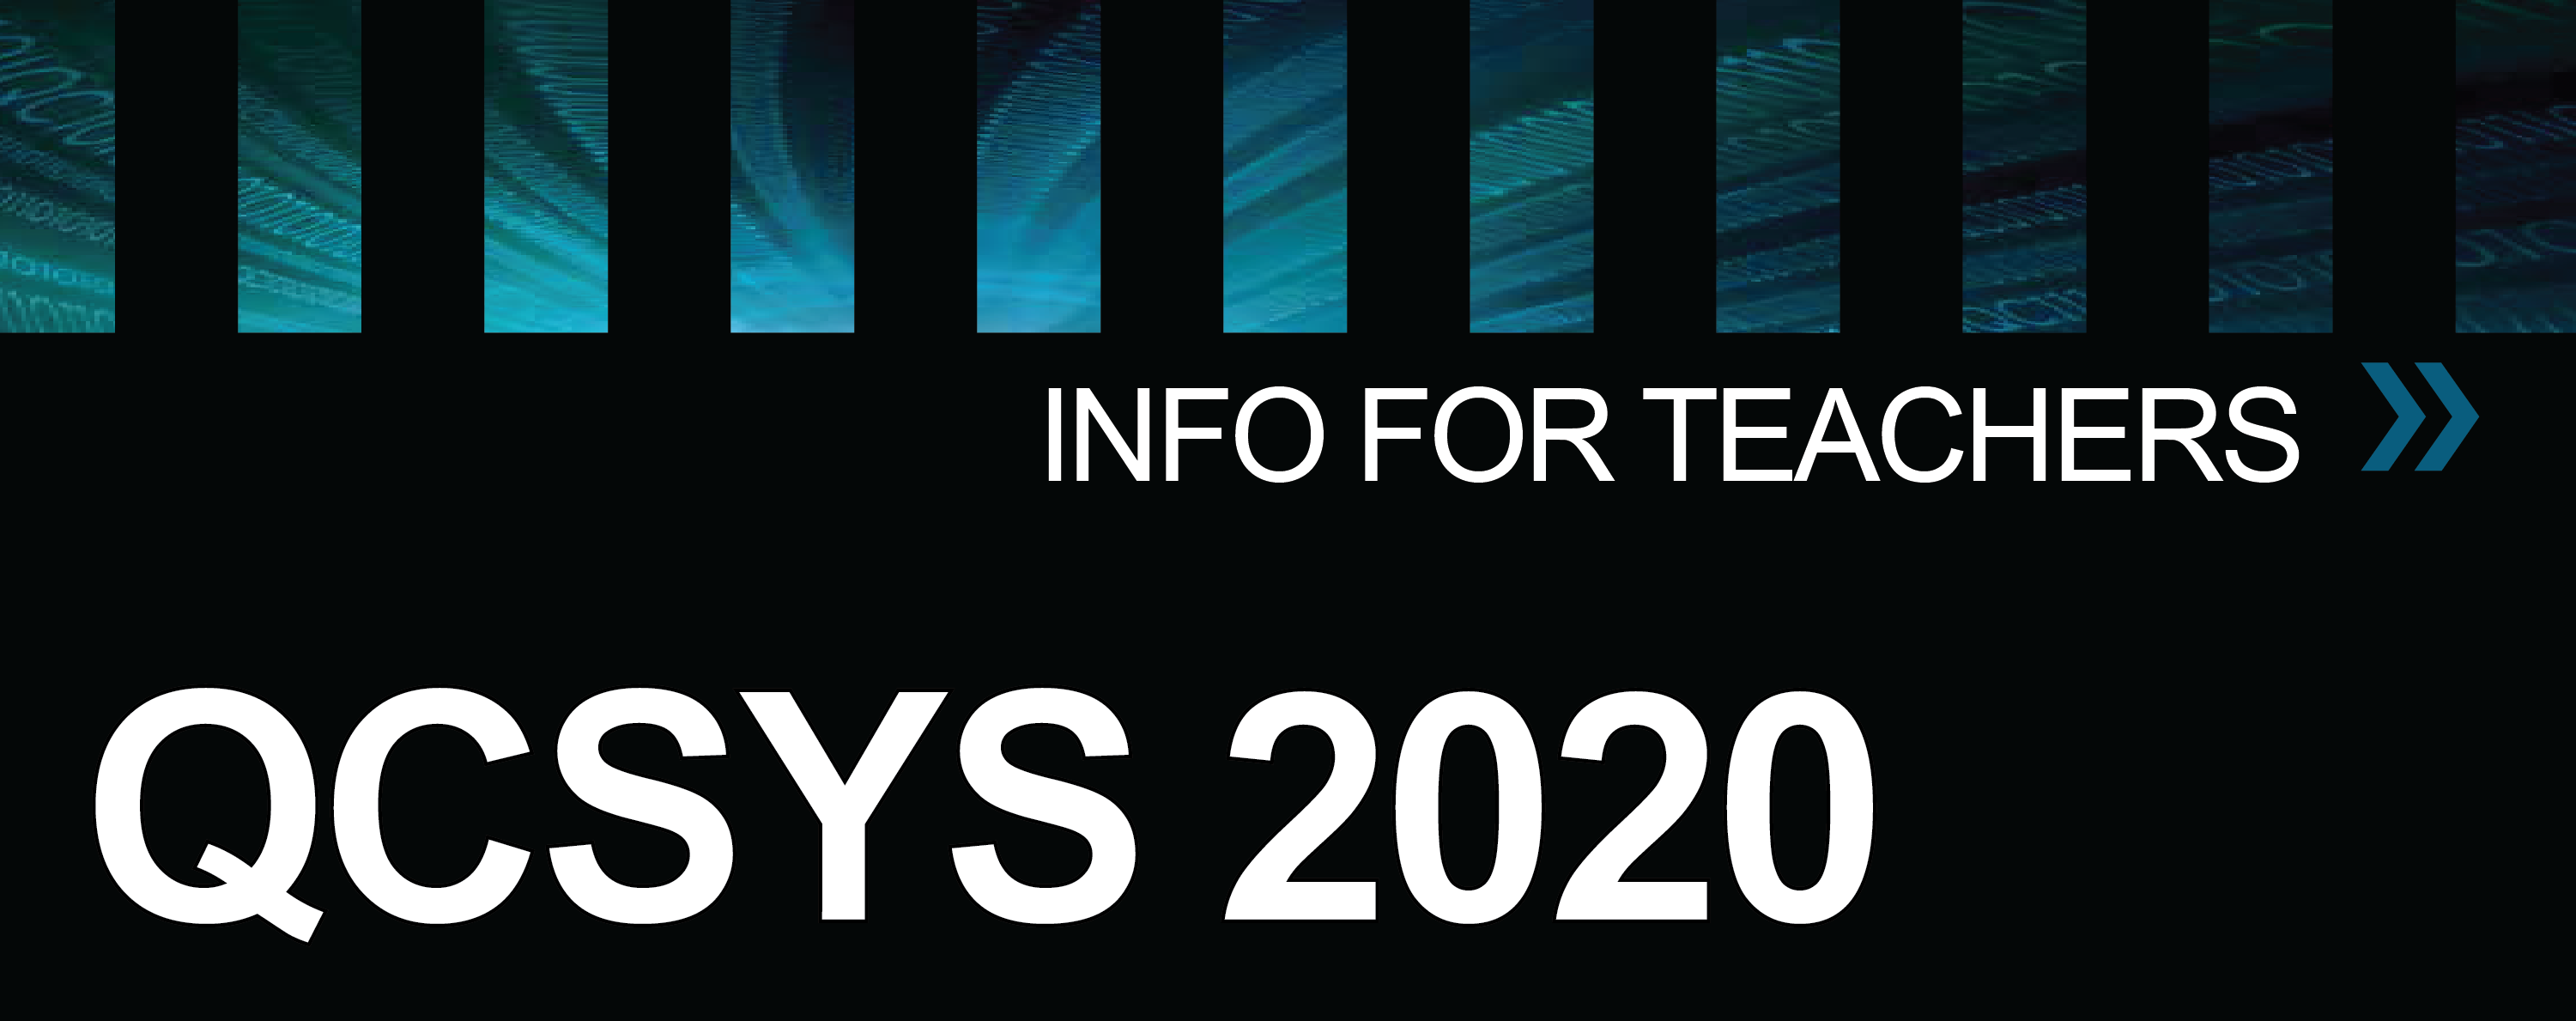 Teachers find out more about QCSYS 2020